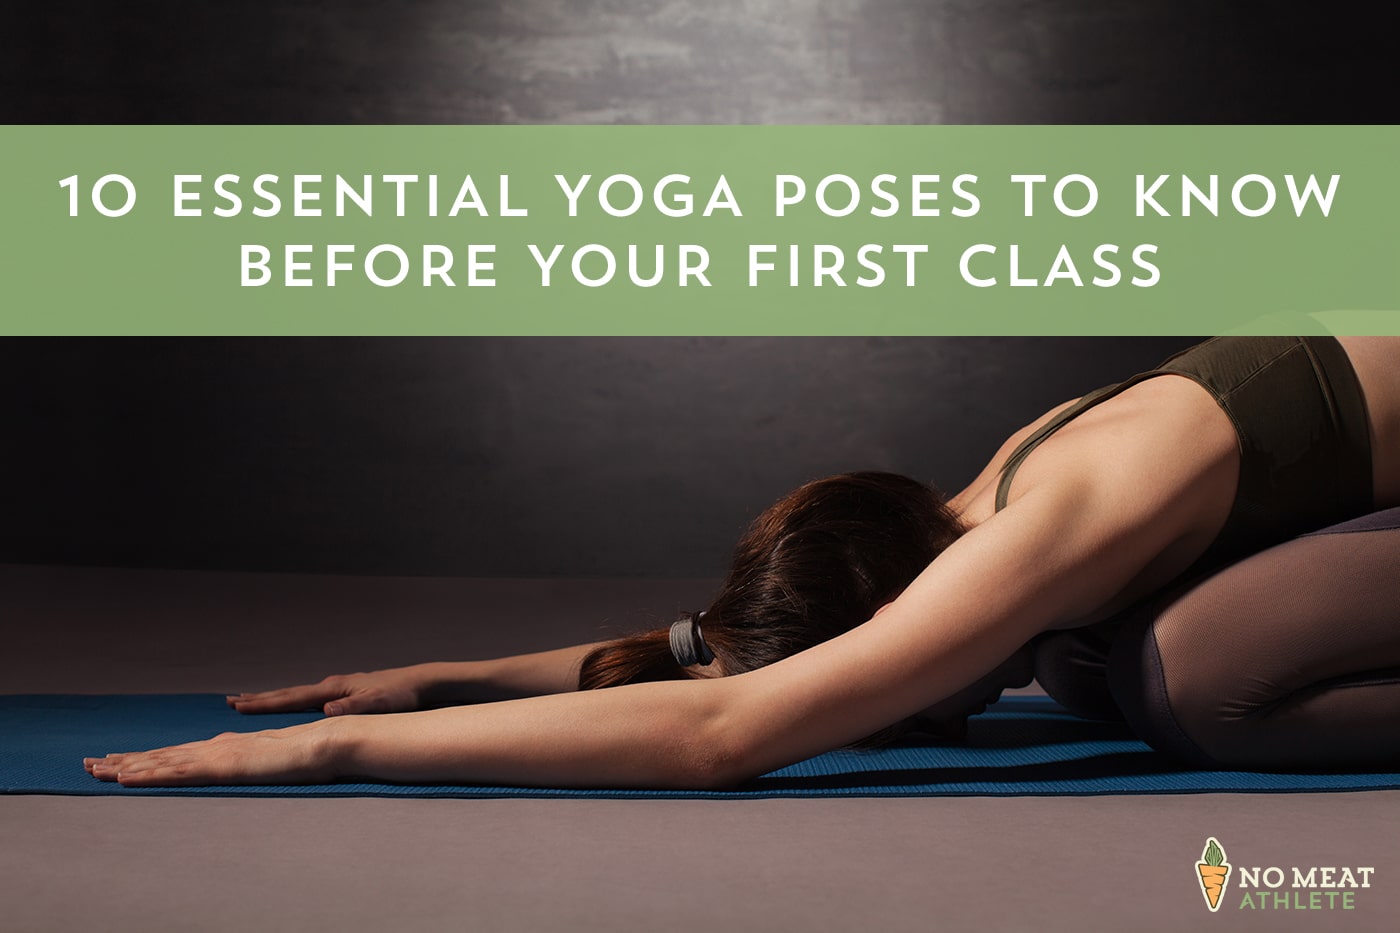 The Amazing Yoga Poses, Asanas & Postures You Will Learn In Yoga